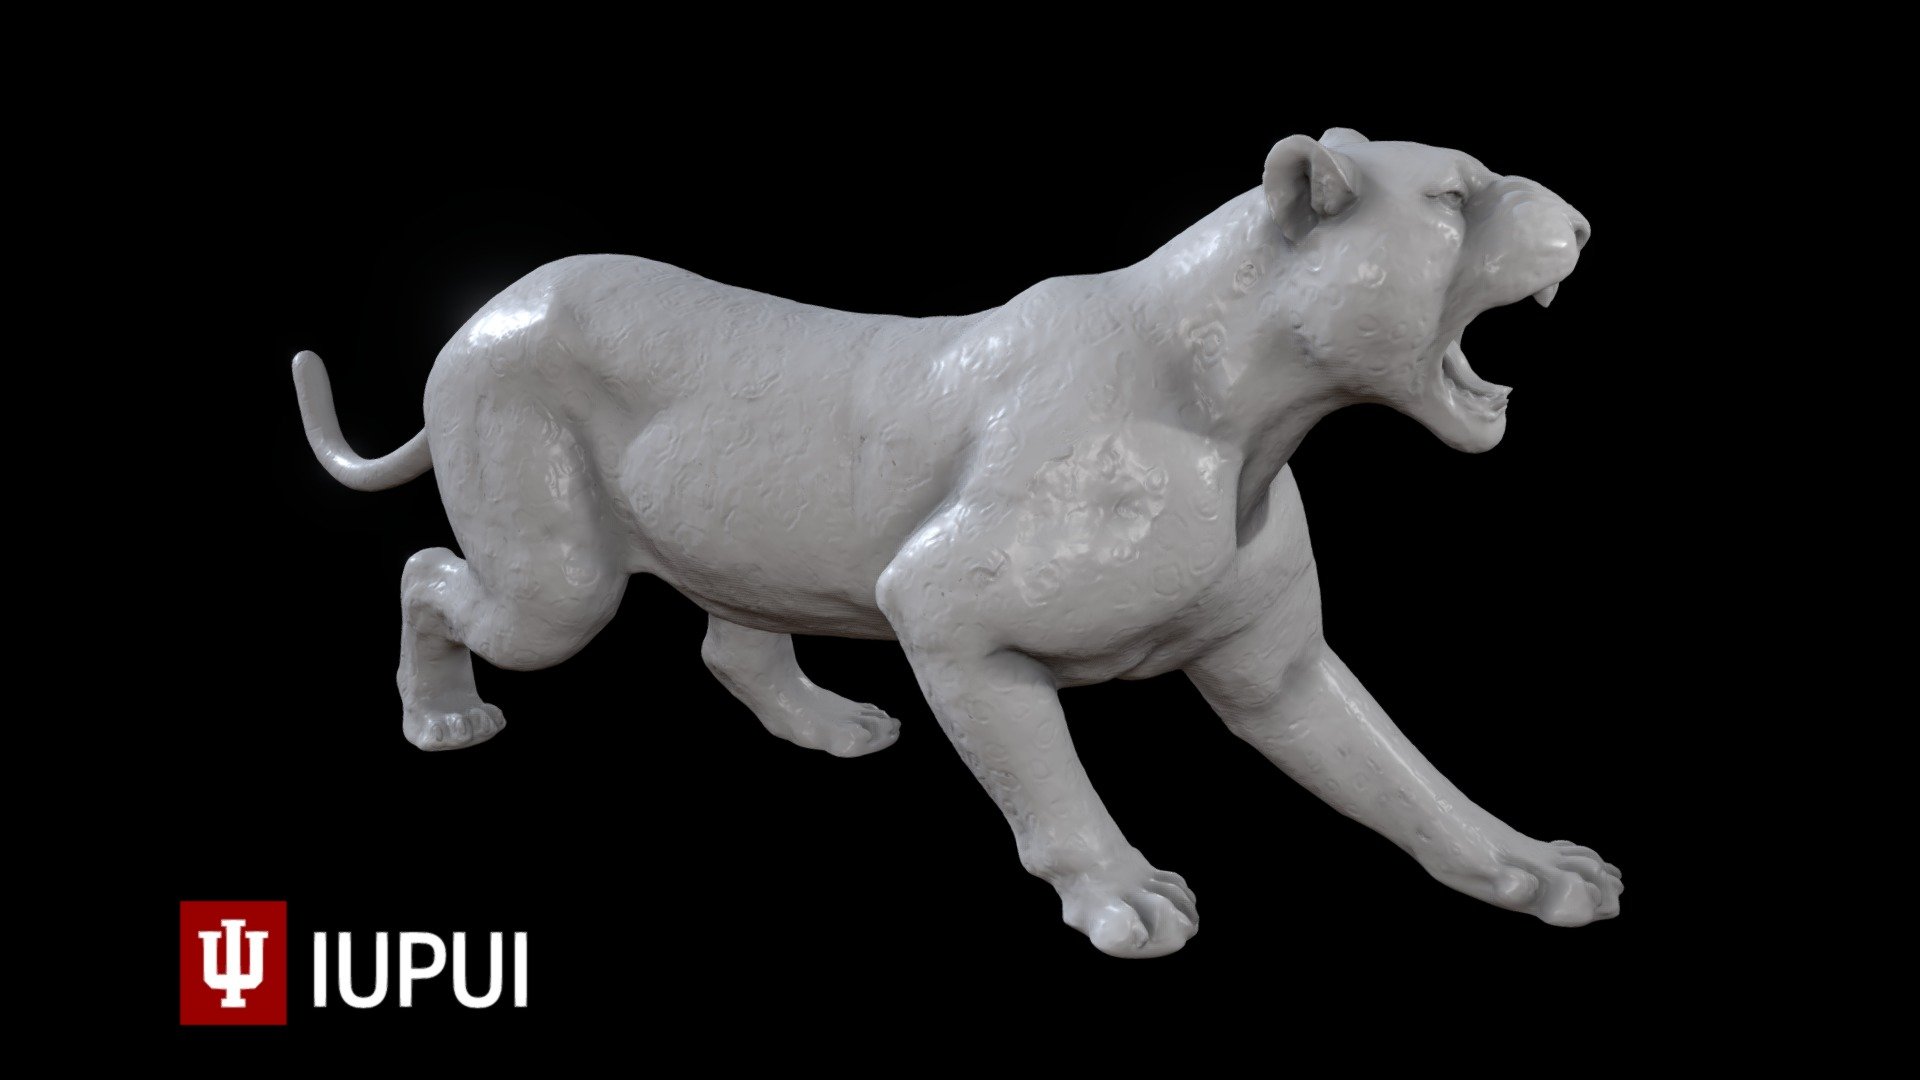 This is a 3D scan of the IUPUI Jaguar Statue.

The statue was 3D scanned by IUPUI University Library with a Creaform Go! Scan Spark 3d model